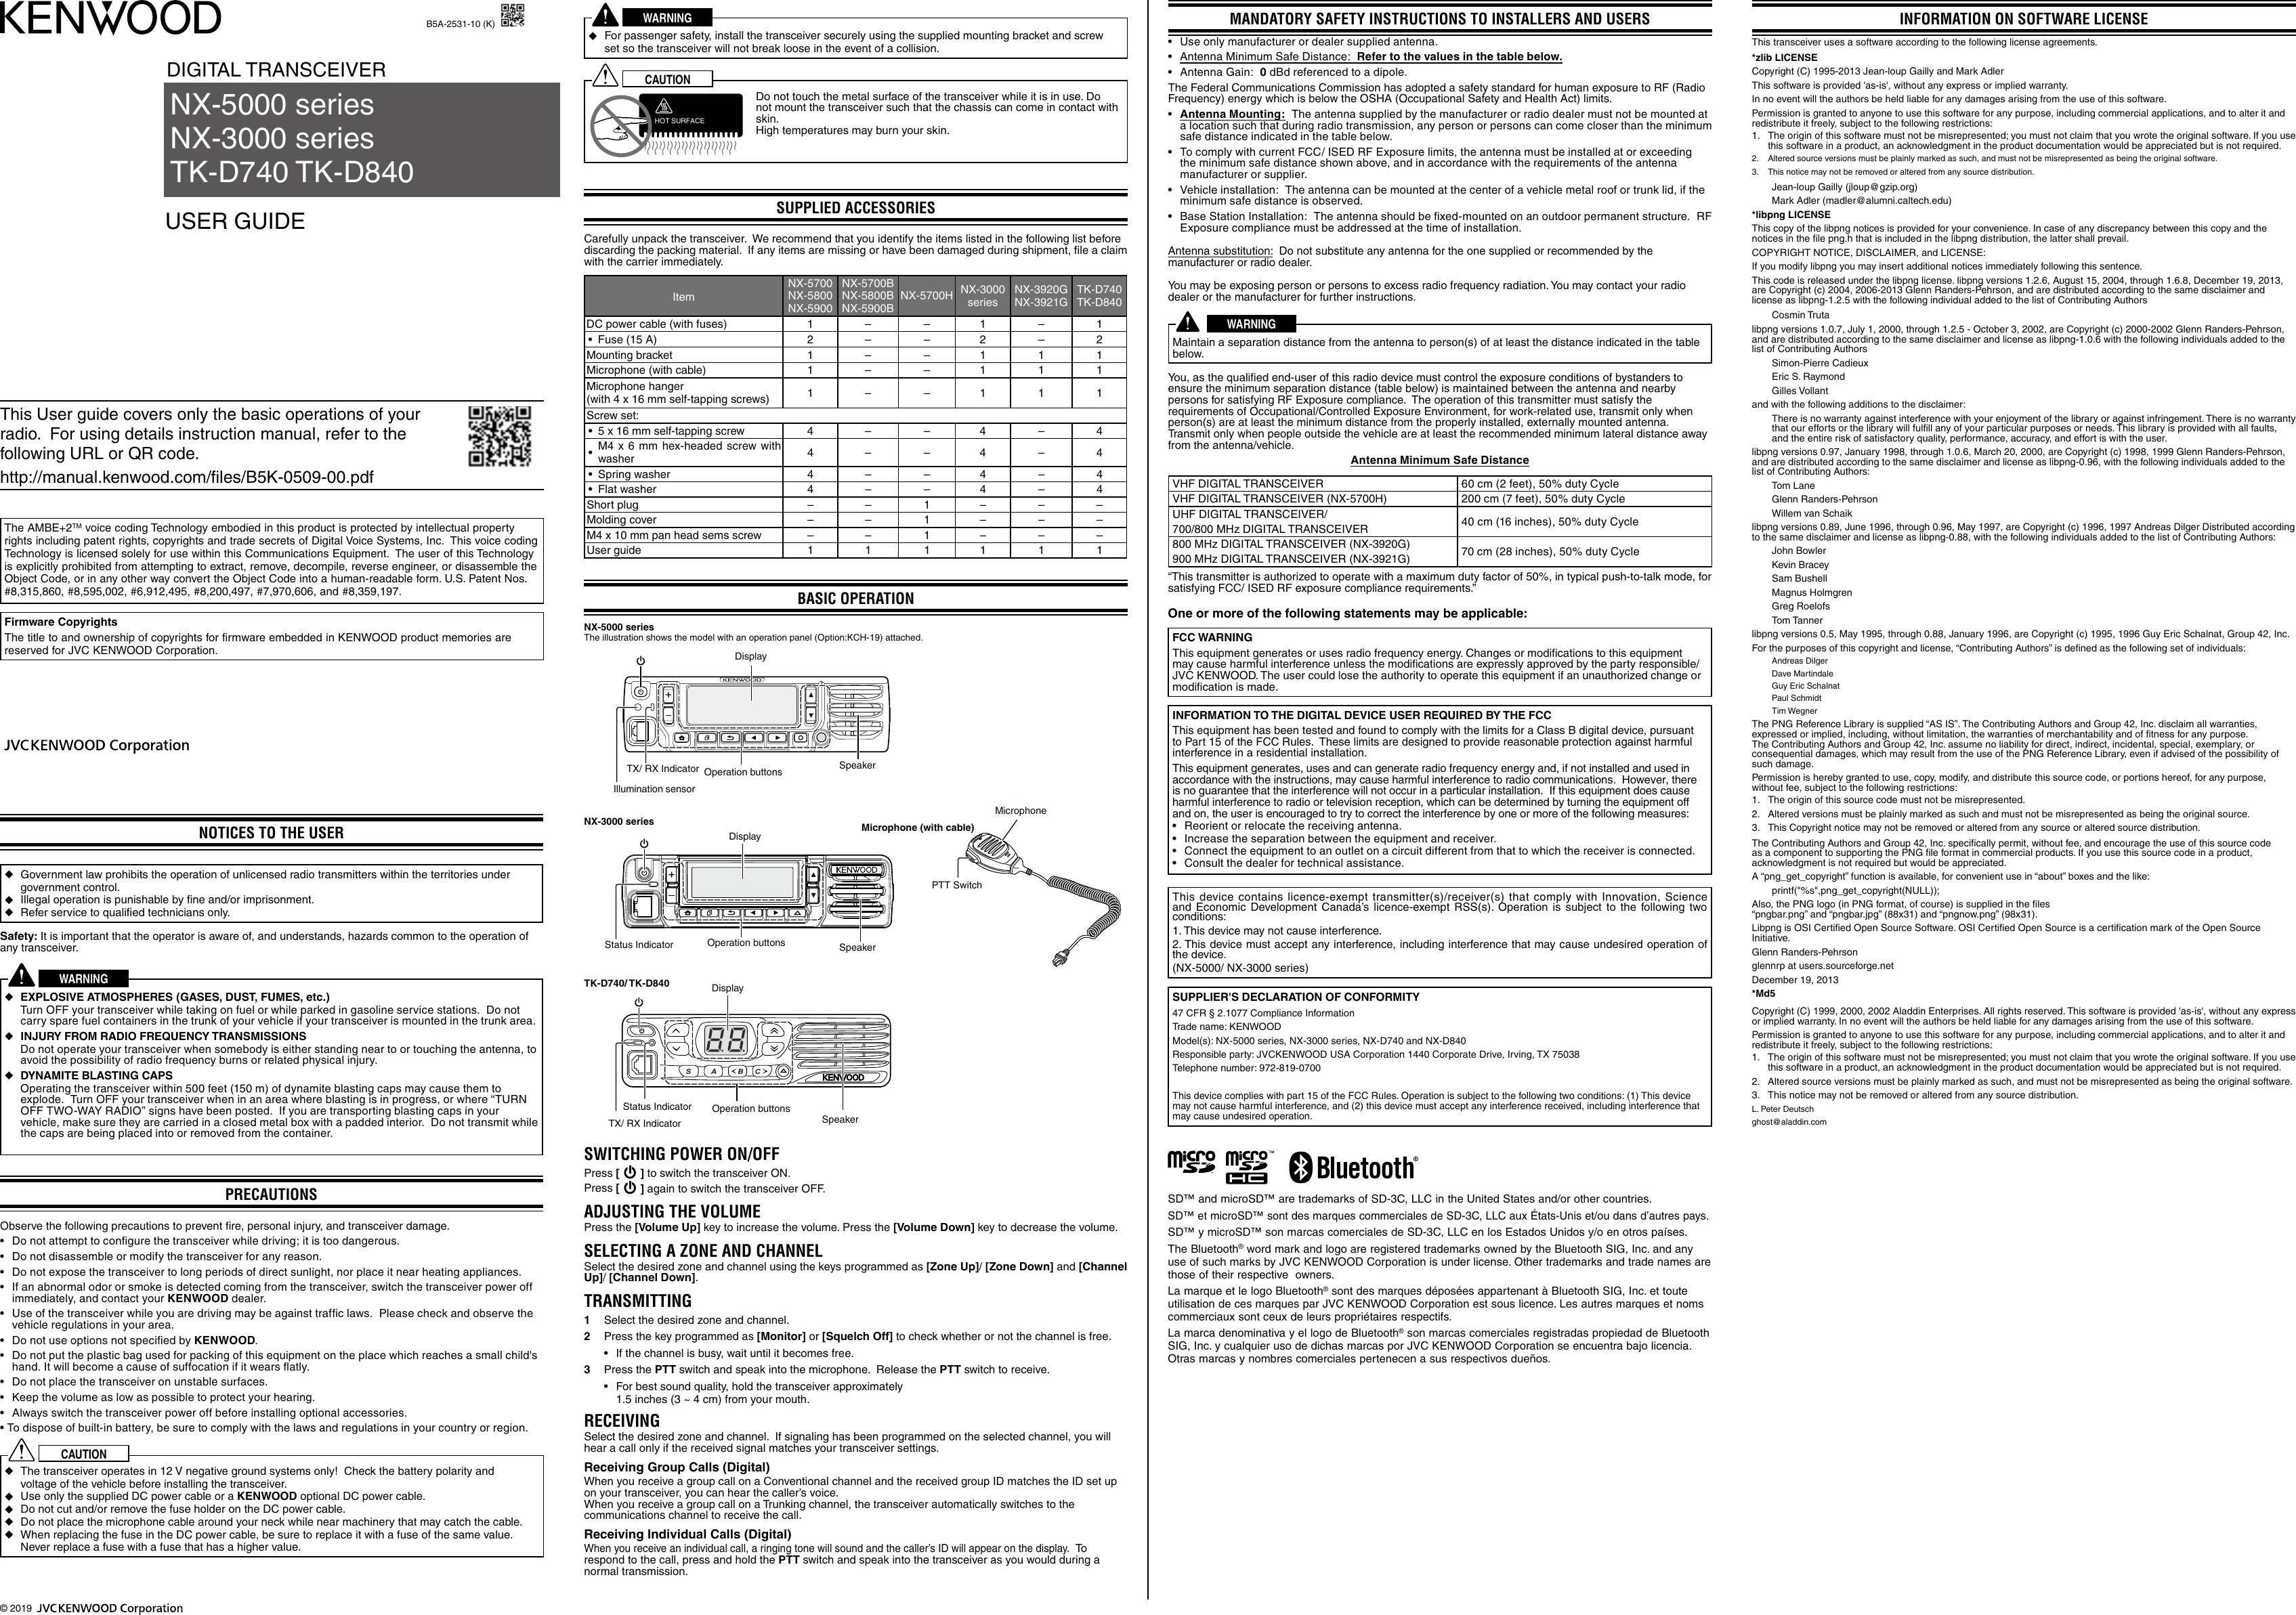 This User guide covers only the basic operations of your radio.  For using details instruction manual, refer to the following URL or QR code.http://manual.kenwood.com/files/B5K-0509-00.pdfThe AMBE+2TM voice coding Technology embodied in this product is protected by intellectual property rights including patent rights, copyrights and trade secrets of Digital Voice Systems, Inc.  This voice coding Technology is licensed solely for use within this Communications Equipment.  The user of this Technology is explicitly prohibited from attempting to extract, remove, decompile, reverse engineer, or disassemble the Object Code, or in any other way convert the Object Code into a human-readable form. U.S. Patent Nos. #8,315,860, #8,595,002, #6,912,495, #8,200,497, #7,970,606, and #8,359,197.Firmware CopyrightsThe title to and ownership of copyrights for firmware embedded in KENWOOD product memories are reserved for JVC KENWOOD Corporation. NOTICES TO THE USER ◆Government law prohibits the operation of unlicensed radio transmitters within the territories under government control. ◆Illegal operation is punishable by ﬁne and/or imprisonment. ◆Refer service to qualiﬁed technicians only.Safety: It is important that the operator is aware of, and understands, hazards common to the operation of any transceiver.WARNING ◆EXPLOSIVE ATMOSPHERES (GASES, DUST, FUMES, etc.)     Turn OFF your transceiver while taking on fuel or while parked in gasoline service stations.  Do not carry spare fuel containers in the trunk of your vehicle if your transceiver is mounted in the trunk area. ◆INJURY FROM RADIO FREQUENCY TRANSMISSIONS     Do not operate your transceiver when somebody is either standing near to or touching the antenna, to avoid the possibility of radio frequency burns or related physical injury. ◆DYNAMITE BLASTING CAPS     Operating the transceiver within 500 feet (150 m) of dynamite blasting caps may cause them to explode.  Turn OFF your transceiver when in an area where blasting is in progress, or where “TURN OFF TWO-WAY RADIO” signs have been posted.  If you are transporting blasting caps in your vehicle, make sure they are carried in a closed metal box with a padded interior.  Do not transmit while the caps are being placed into or removed from the container.PRECAUTIONSObserve the following precautions to prevent ﬁre, personal injury, and transceiver damage.• Donotattempttocongurethetransceiverwhiledriving;itistoodangerous.• Donotdisassembleormodifythetransceiverforanyreason.• Donotexposethetransceivertolongperiodsofdirectsunlight,norplaceitnearheatingappliances.• Ifanabnormalodororsmokeisdetectedcomingfromthetransceiver,switchthetransceiverpoweroffimmediately, and contact your KENWOOD dealer.• Useofthetransceiverwhileyouaredrivingmaybeagainsttrafclaws.Pleasecheckandobservethevehicle regulations in your area.• DonotuseoptionsnotspeciedbyKENWOOD.• Donotputtheplasticbagusedforpackingofthisequipmentontheplacewhichreachesasmallchild&apos;shand. It will become a cause of suffocation if it wears ﬂatly.• Donotplacethetransceiveronunstablesurfaces.• Keepthevolumeaslowaspossibletoprotectyourhearing.• Alwaysswitchthetransceiverpoweroffbeforeinstallingoptionalaccessories.•Todisposeofbuilt-inbattery,besuretocomplywiththelawsandregulationsinyourcountryorregion.CAUTION ◆The transceiver operates in 12 V negative ground systems only!  Check the battery polarity and voltage of the vehicle before installing the transceiver. ◆Use only the supplied DC power cable or a KENWOOD optional DC power cable. ◆Do not cut and/or remove the fuse holder on the DC power cable. ◆Do not place the microphone cable around your neck while near machinery that may catch the cable. ◆When replacing the fuse in the DC power cable, be sure to replace it with a fuse of the same value. Never replace a fuse with a fuse that has a higher value.B5A-2531-10 (K)WARNING ◆For passenger safety, install the transceiver securely using the supplied mounting bracket and screw set so the transceiver will not break loose in the event of a collision.CAUTIONHOT SURFACEDo not touch the metal surface of the transceiver while it is in use. Do not mount the transceiver such that the chassis can come in contact with skin. High temperatures may burn your skin.SUPPlIEd ACCESSORIESCarefully unpack the transceiver.  We recommend that you identify the items listed in the following list before discarding the packing material.  If any items are missing or have been damaged during shipment, ﬁle a claim with the carrier immediately.ItemNX-5700NX-5800NX-5900NX-5700BNX-5800BNX-5900B NX-5700H NX-3000 series NX-3920GNX-3921G  TK-D740TK-D840DC power cable (with fuses) 1 – – 1 – 1• Fuse (15 A) 2 – – 2 – 2Mounting bracket 1 – – 1 1 1Microphone (with cable) 1 – – 1 1 1Microphone hanger(with 4 x 16 mm self-tapping screws) 1 – – 1 1 1Screw set:• 5 x 16 mm self-tapping screw  4 – – 4 – 4• M4 x 6 mm hex-headed screw with washer  4 – – 4 – 4• Spring washer 4 – – 4 – 4• Flat washer 4 – – 4 – 4Short plug – – 1 – – –Molding cover – – 1 – – –M4 x 10 mm pan head sems screw – – 1 – – –User guide 1 1 1 1 1 1BASIC OPERATIONTX/ RX IndicatorIllumination sensorSpeakerDisplayOperation buttonsPTT SwitchMicrophoneStatus Indicator SpeakerDisplayOperation buttonsStatus IndicatorTX/ RX Indicator SpeakerOperation buttonsDisplaySwITCHINg POwER ON/OFFPress [   ] to switch the transceiver ON.Press [  ] again to switch the transceiver OFF.AdjUSTINg THE VOlUmEPress the [Volume Up] key to increase the volume. Press the [Volume Down] key to decrease the volume.SElECTINg A ZONE ANd CHANNEl  Select the desired zone and channel using the keys programmed as [Zone Up]/ [Zone Down] and [Channel Up]/ [Channel Down].TRANSmITTINg1  Select the desired zone and channel.2  Press the key programmed as [Monitor] or [Squelch Off] to check whether or not the channel is free.• Ifthechannelisbusy,waituntilitbecomesfree.3  Press the PTT switch and speak into the microphone.  Release the PTT switch to receive.• Forbestsoundquality,holdthetransceiverapproximately 1.5 inches (3 ~ 4 cm) from your mouth.RECEIVINgSelect the desired zone and channel.  If signaling has been programmed on the selected channel, you will hear a call only if the received signal matches your transceiver settings.Receiving Group Calls (Digital) When you receive a group call on a Conventional channel and the received group ID matches the ID set up on your transceiver, you can hear the caller’s voice. When you receive a group call on a Trunking channel, the transceiver automatically switches to the communications channel to receive the call.Receiving Individual Calls (Digital) When you receive an individual call, a ringing tone will sound and the caller’s ID will appear on the display.  To respond to the call, press and hold the PTT switch and speak into the transceiver as you would during a normal transmission.DIGITAL TRANSCEIVER USER GUIDENX-5000 seriesNX-3000 seriesTK-D740 TK-D840TK-D740/ TK-D840NX-3000 seriesNX-5000 seriesThe illustration shows the model with an operation panel (Option:KCH-19) attached.Microphone (with cable)mANdATORY SAFETY INSTRUCTIONS TO INSTAllERS ANd USERS • Useonlymanufacturerordealersuppliedantenna.• Antenna Minimum Safe Distance:  Refer to the values in the table below.• AntennaGain:0 dBd referenced to a dipole.The Federal Communications Commission has adopted a safety standard for human exposure to RF (Radio Frequency) energy which is below the OSHA (Occupational Safety and Health Act) limits.• Antenna Mounting:  The antenna supplied by the manufacturer or radio dealer must not be mounted at a location such that during radio transmission, any person or persons can come closer than the minimum safe distance indicated in the table below.• TocomplywithcurrentFCC/ISEDRFExposurelimits,theantennamustbeinstalledatorexceedingthe minimum safe distance shown above, and in accordance with the requirements of the antenna manufacturer or supplier.• Vehicleinstallation:Theantennacanbemountedatthecenterofavehiclemetalroofortrunklid,iftheminimum safe distance is observed.• BaseStationInstallation:Theantennashouldbexed-mountedonanoutdoorpermanentstructure.RFExposure compliance must be addressed at the time of installation.Antenna substitution:  Do not substitute any antenna for the one supplied or recommended by the manufacturer or radio dealer.You may be exposing person or persons to excess radio frequency radiation. You may contact your radio dealer or the manufacturer for further instructions.WARNINGMaintain a separation distance from the antenna to person(s) of at least the distance indicated in the table below.You, as the qualiﬁed end-user of this radio device must control the exposure conditions of bystanders to ensure the minimum separation distance (table below) is maintained between the antenna and nearby persons for satisfying RF Exposure compliance.  The operation of this transmitter must satisfy the requirements of Occupational/Controlled Exposure Environment, for work-related use, transmit only when person(s) are at least the minimum distance from the properly installed, externally mounted antenna.  Transmit only when people outside the vehicle are at least the recommended minimum lateral distance away from the antenna/vehicle.Antenna Minimum Safe DistanceVHF DIGITAL TRANSCEIVER 60 cm (2 feet), 50% duty CycleVHF DIGITAL TRANSCEIVER (NX-5700H) 200 cm (7 feet), 50% duty CycleUHF DIGITAL TRANSCEIVER/ 700/800 MHz DIGITAL TRANSCEIVER 40 cm (16 inches), 50% duty Cycle800 MHz DIGITAL TRANSCEIVER (NX-3920G)900 MHz DIGITAL TRANSCEIVER (NX-3921G) 70 cm (28 inches), 50% duty Cycle“This transmitter is authorized to operate with a maximum duty factor of 50%, in typical push-to-talk mode, for satisfying FCC/ ISED RF exposure compliance requirements.”SD™ and microSD™ are trademarks of SD-3C, LLC in the United States and/or other countries.SD™ et microSD™ sont des marques commerciales de SD-3C, LLC aux États-Unis et/ou dans d’autres pays.SD™ y microSD™ son marcas comerciales de SD-3C, LLC en los Estados Unidos y/o en otros países.The Bluetooth® word mark and logo are registered trademarks owned by the Bluetooth SIG, Inc. and any use of such marks by JVC KENWOOD Corporation is under license. Other trademarks and trade names are those of their respective  owners.La marque et le logo Bluetooth® sont des marques déposées appartenant à Bluetooth SIG, Inc. et toute utilisation de ces marques par JVC KENWOOD Corporation est sous licence. Les autres marques et noms commerciaux sont ceux de leurs propriétaires respectifs.La marca denominativa y el logo de Bluetooth® son marcas comerciales registradas propiedad de Bluetooth SIG, Inc. y cualquier uso de dichas marcas por JVC KENWOOD Corporation se encuentra bajo licencia. Otras marcas y nombres comerciales pertenecen a sus respectivos dueños.One or more of the following statements may be applicable:FCC WARNINGThis equipment generates or uses radio frequency energy. Changes or modiﬁcations to this equipment may cause harmful interference unless the modiﬁcations are expressly approved by the party responsible/ JVC KENWOOD. The user could lose the authority to operate this equipment if an unauthorized change or modiﬁcation is made.INFORMATION TO THE DIGITAL DEVICE USER REQUIRED BY THE FCCThis equipment has been tested and found to comply with the limits for a Class B digital device, pursuant to Part 15 of the FCC Rules.  These limits are designed to provide reasonable protection against harmful interference in a residential installation.This equipment generates, uses and can generate radio frequency energy and, if not installed and used in accordance with the instructions, may cause harmful interference to radio communications.  However, there is no guarantee that the interference will not occur in a particular installation.  If this equipment does cause harmful interference to radio or television reception, which can be determined by turning the equipment off and on, the user is encouraged to try to correct the interference by one or more of the following measures:• Reorientorrelocatethereceivingantenna.• Increasetheseparationbetweentheequipmentandreceiver.• Connecttheequipmenttoanoutletonacircuitdifferentfromthattowhichthereceiverisconnected.• Consultthedealerfortechnicalassistance.This device contains licence-exempt transmitter(s)/receiver(s) that comply with Innovation, Science and Economic Development Canada’s licence-exempt RSS(s). Operation is subject to the following two conditions:1. This device may not cause interference.2. This device must accept any interference, including interference that may cause undesired operation of the device.(NX-5000/ NX-3000 series)INFORmATION ON SOFTwARE lICENSEThis transceiver uses a software according to the following license agreements.*zlib LICENSECopyright (C) 1995-2013 Jean-loup Gailly and Mark AdlerThissoftwareisprovided&apos;as-is&apos;,withoutanyexpressorimpliedwarranty.In no event will the authors be held liable for any damages arising from the use of this software.Permission is granted to anyone to use this software for any purpose, including commercial applications, and to alter it and redistribute it freely, subject to the following restrictions:1. Theoriginofthissoftwaremustnotbemisrepresented;youmustnotclaimthatyouwrotetheoriginalsoftware.Ifyouusethis software in a product, an acknowledgment in the product documentation would be appreciated but is not required.2.   Altered source versions must be plainly marked as such, and must not be misrepresented as being the original software.3.   This notice may not be removed or altered from any source distribution.Jean-loup Gailly (jloup@gzip.org)Mark Adler (madler@alumni.caltech.edu)*libpng LICENSEThis copy of the libpng notices is provided for your convenience. In case of any discrepancy between this copy and the notices in the ﬁle png.h that is included in the libpng distribution, the latter shall prevail.COPYRIGHT NOTICE, DISCLAIMER, and LICENSE:If you modify libpng you may insert additional notices immediately following this sentence.This code is released under the libpng license. libpng versions 1.2.6, August 15, 2004, through 1.6.8, December 19, 2013, are Copyright (c) 2004, 2006-2013 Glenn Randers-Pehrson, and are distributed according to the same disclaimer and license as libpng-1.2.5 with the following individual added to the list of Contributing AuthorsCosmin Trutalibpng versions 1.0.7, July 1, 2000, through 1.2.5 - October 3, 2002, are Copyright (c) 2000-2002 Glenn Randers-Pehrson, and are distributed according to the same disclaimer and license as libpng-1.0.6 with the following individuals added to the list of Contributing Authors Simon-Pierre CadieuxEric S. RaymondGilles Vollantand with the following additions to the disclaimer:There is no warranty against interference with your enjoyment of the library or against infringement. There is no warranty that our efforts or the library will fulﬁll any of your particular purposes or needs. This library is provided with all faults, and the entire risk of satisfactory quality, performance, accuracy, and effort is with the user.libpng versions 0.97, January 1998, through 1.0.6, March 20, 2000, are Copyright (c) 1998, 1999 Glenn Randers-Pehrson, and are distributed according to the same disclaimer and license as libpng-0.96, with the following individuals added to the list of Contributing Authors:Tom LaneGlenn Randers-PehrsonWillem van Schaiklibpng versions 0.89, June 1996, through 0.96, May 1997, are Copyright (c) 1996, 1997 Andreas Dilger Distributed according to the same disclaimer and license as libpng-0.88, with the following individuals added to the list of Contributing Authors:John BowlerKevin BraceySam BushellMagnus HolmgrenGreg RoelofsTom Tannerlibpng versions 0.5, May 1995, through 0.88, January 1996, are Copyright (c) 1995, 1996 Guy Eric Schalnat, Group 42, Inc.For the purposes of this copyright and license, “Contributing Authors” is deﬁned as the following set of individuals:Andreas DilgerDave MartindaleGuy Eric SchalnatPaul SchmidtTim WegnerThe PNG Reference Library is supplied “AS IS”. The Contributing Authors and Group 42, Inc. disclaim all warranties, expressed or implied, including, without limitation, the warranties of merchantability and of ﬁtness for any purpose. The Contributing Authors and Group 42, Inc. assume no liability for direct, indirect, incidental, special, exemplary, or consequential damages, which may result from the use of the PNG Reference Library, even if advised of the possibility of such damage.Permission is hereby granted to use, copy, modify, and distribute this source code, or portions hereof, for any purpose, without fee, subject to the following restrictions:1.   The origin of this source code must not be misrepresented.2.   Altered versions must be plainly marked as such and must not be misrepresented as being the original source.3.   This Copyright notice may not be removed or altered from any source or altered source distribution.The Contributing Authors and Group 42, Inc. speciﬁcally permit, without fee, and encourage the use of this source code as a component to supporting the PNG ﬁle format in commercial products. If you use this source code in a product, acknowledgment is not required but would be appreciated.A “png_get_copyright” function is available, for convenient use in “about” boxes and the like:printf(&quot;%s&quot;,png_get_copyright(NULL));Also, the PNG logo (in PNG format, of course) is supplied in the ﬁles  “pngbar.png” and “pngbar.jpg” (88x31) and “pngnow.png” (98x31).Libpng is OSI Certiﬁed Open Source Software. OSI Certiﬁed Open Source is a certiﬁcation mark of the Open Source Initiative.Glenn Randers-Pehrsonglennrp at users.sourceforge.netDecember 19, 2013*Md5Copyright(C)1999,2000,2002AladdinEnterprises.Allrightsreserved.Thissoftwareisprovided&apos;as-is&apos;,withoutanyexpressor implied warranty. In no event will the authors be held liable for any damages arising from the use of this software.Permission is granted to anyone to use this software for any purpose, including commercial applications, and to alter it and redistribute it freely, subject to the following restrictions:1. Theoriginofthissoftwaremustnotbemisrepresented;youmustnotclaimthatyouwrotetheoriginalsoftware.Ifyouusethis software in a product, an acknowledgment in the product documentation would be appreciated but is not required.2.   Altered source versions must be plainly marked as such, and must not be misrepresented as being the original software.3.   This notice may not be removed or altered from any source distribution.L. Peter Deutschghost@aladdin.comSUPPLIER&apos;S DECLARATION OF CONFORMITY47 CFR § 2.1077 Compliance InformationTrade name: KENWOODModel(s): NX-5000 series, NX-3000 series, NX-D740 and NX-D840Responsible party: JVCKENWOOD USA Corporation 1440 Corporate Drive, Irving, TX 75038 Telephone number: 972-819-0700This device complies with part 15 of the FCC Rules. Operation is subject to the following two conditions: (1) This device may not cause harmful interference, and (2) this device must accept any interference received, including interference that may cause undesired operation.© 2019 